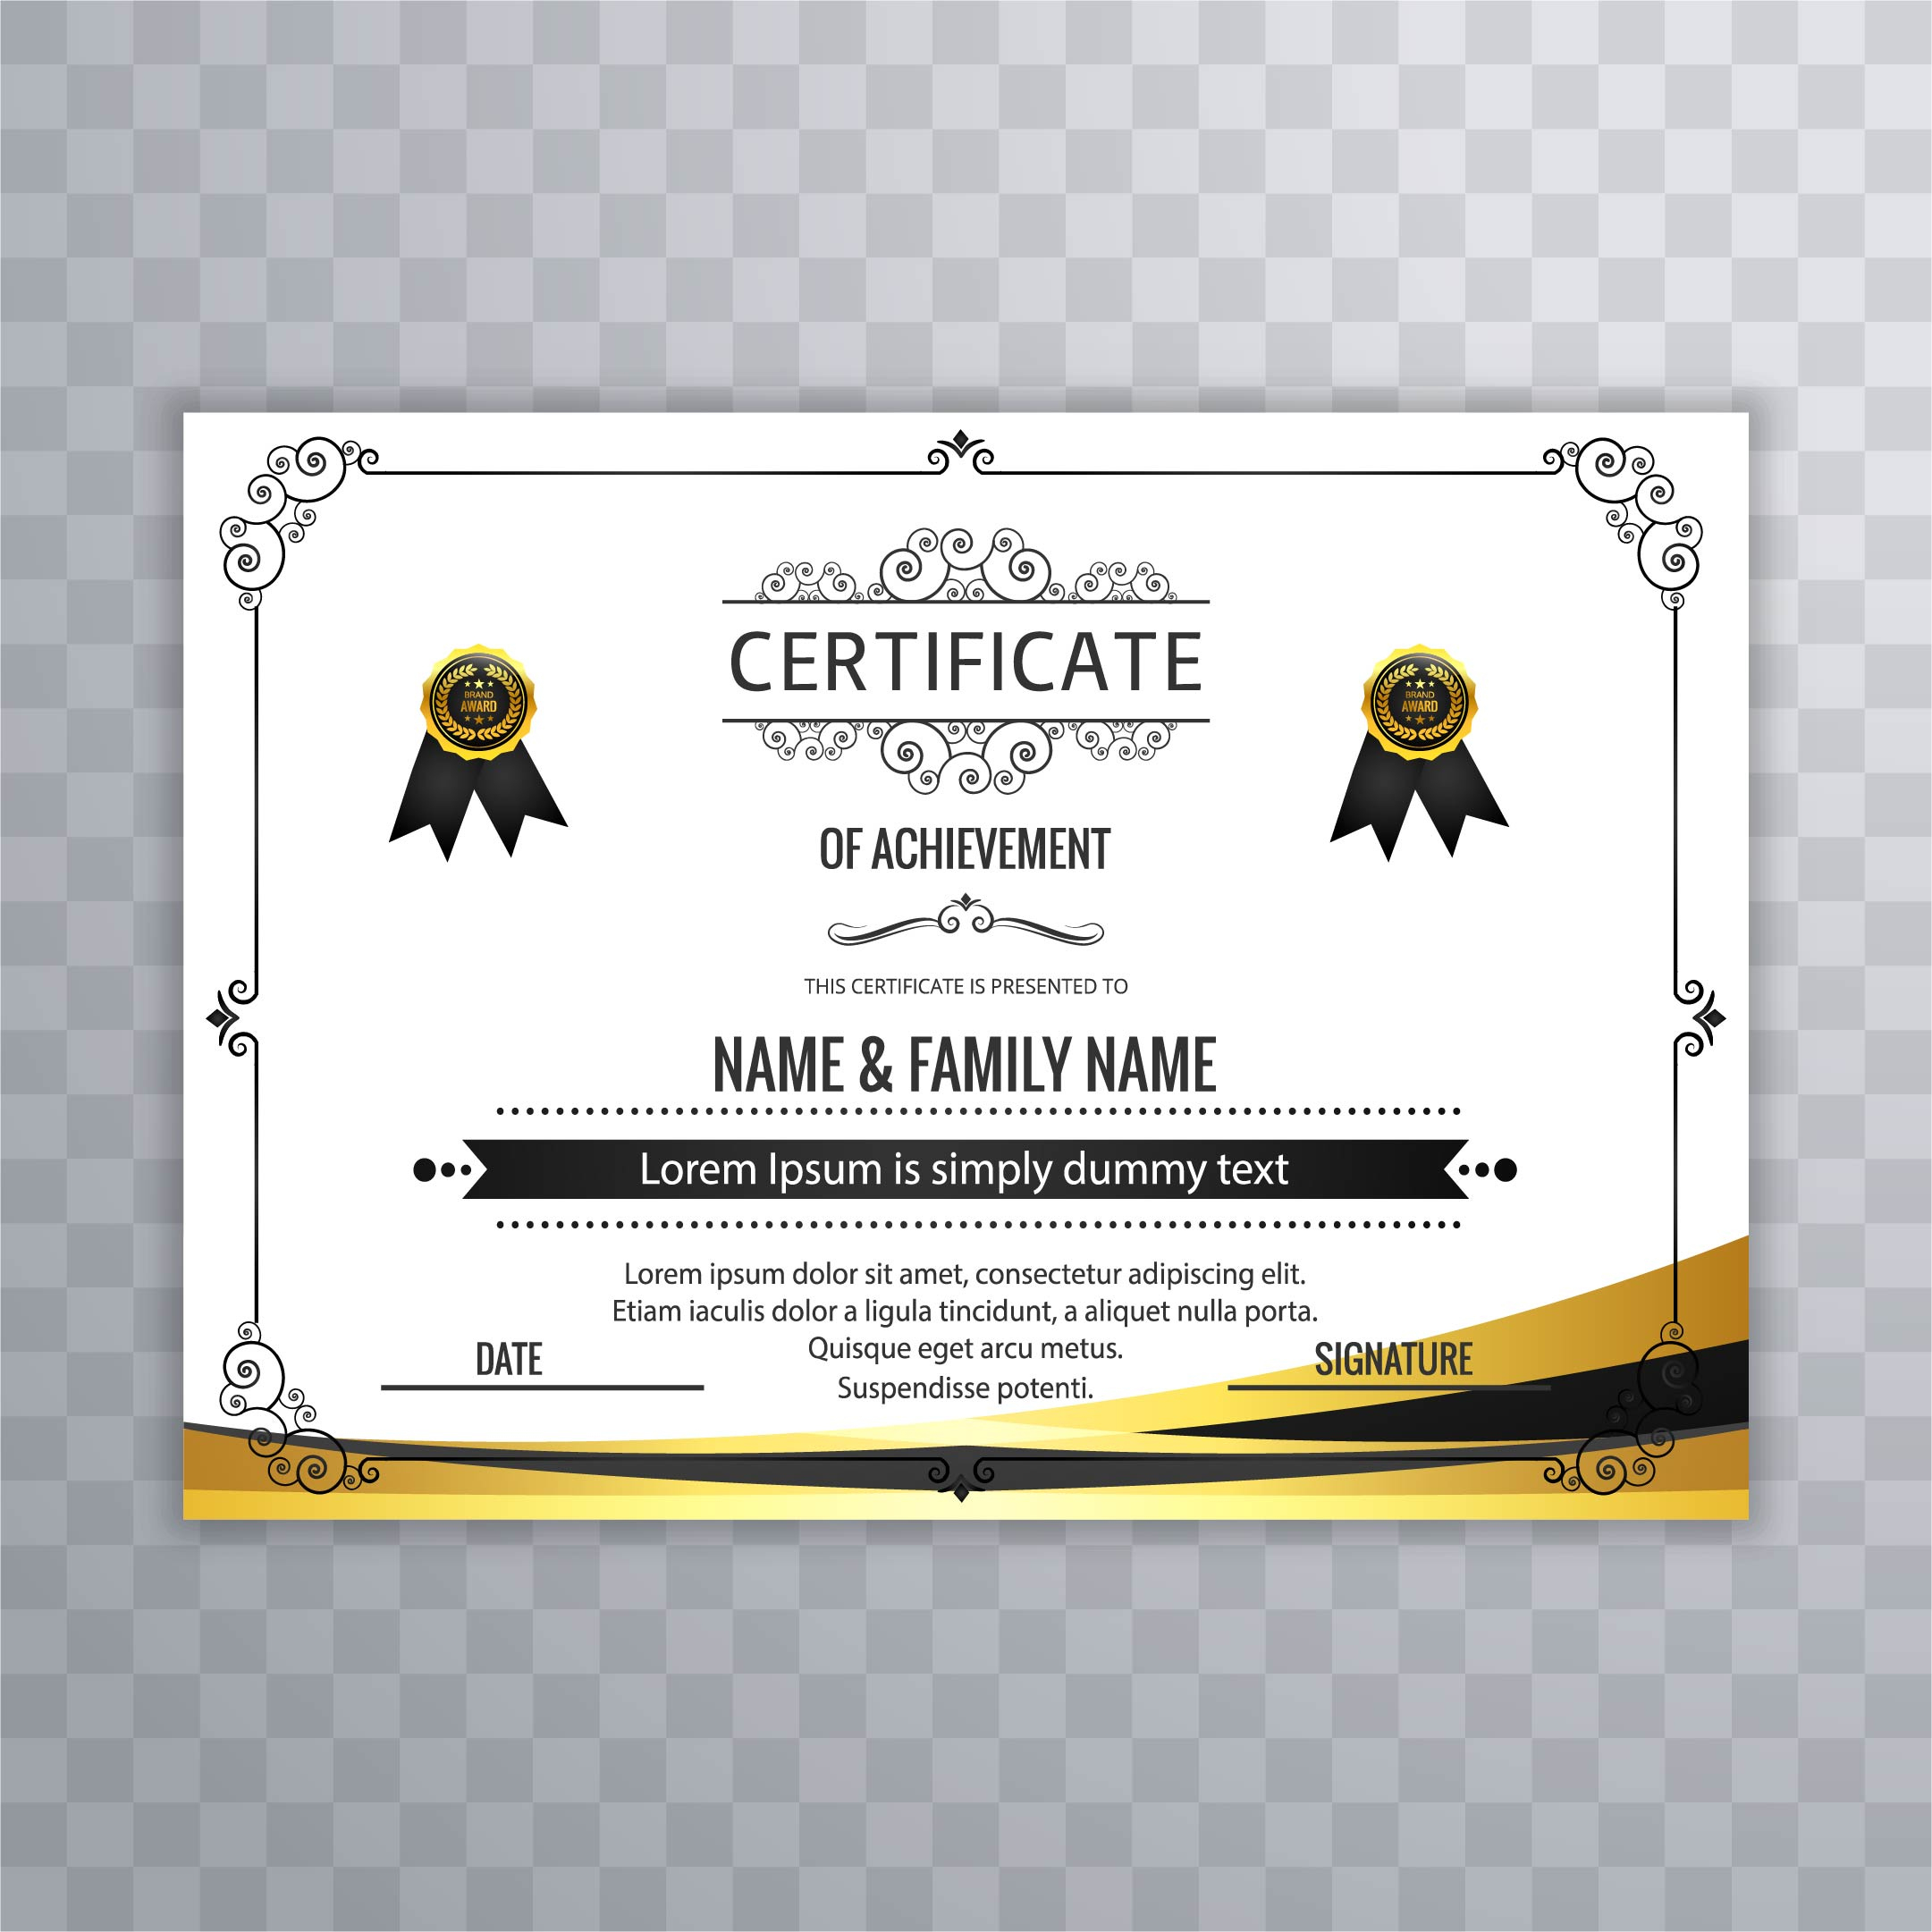 Certificate Of Merit Free Vector Art - (2,425 Free Downloads) with Awesome Merit Award Certificate Templates